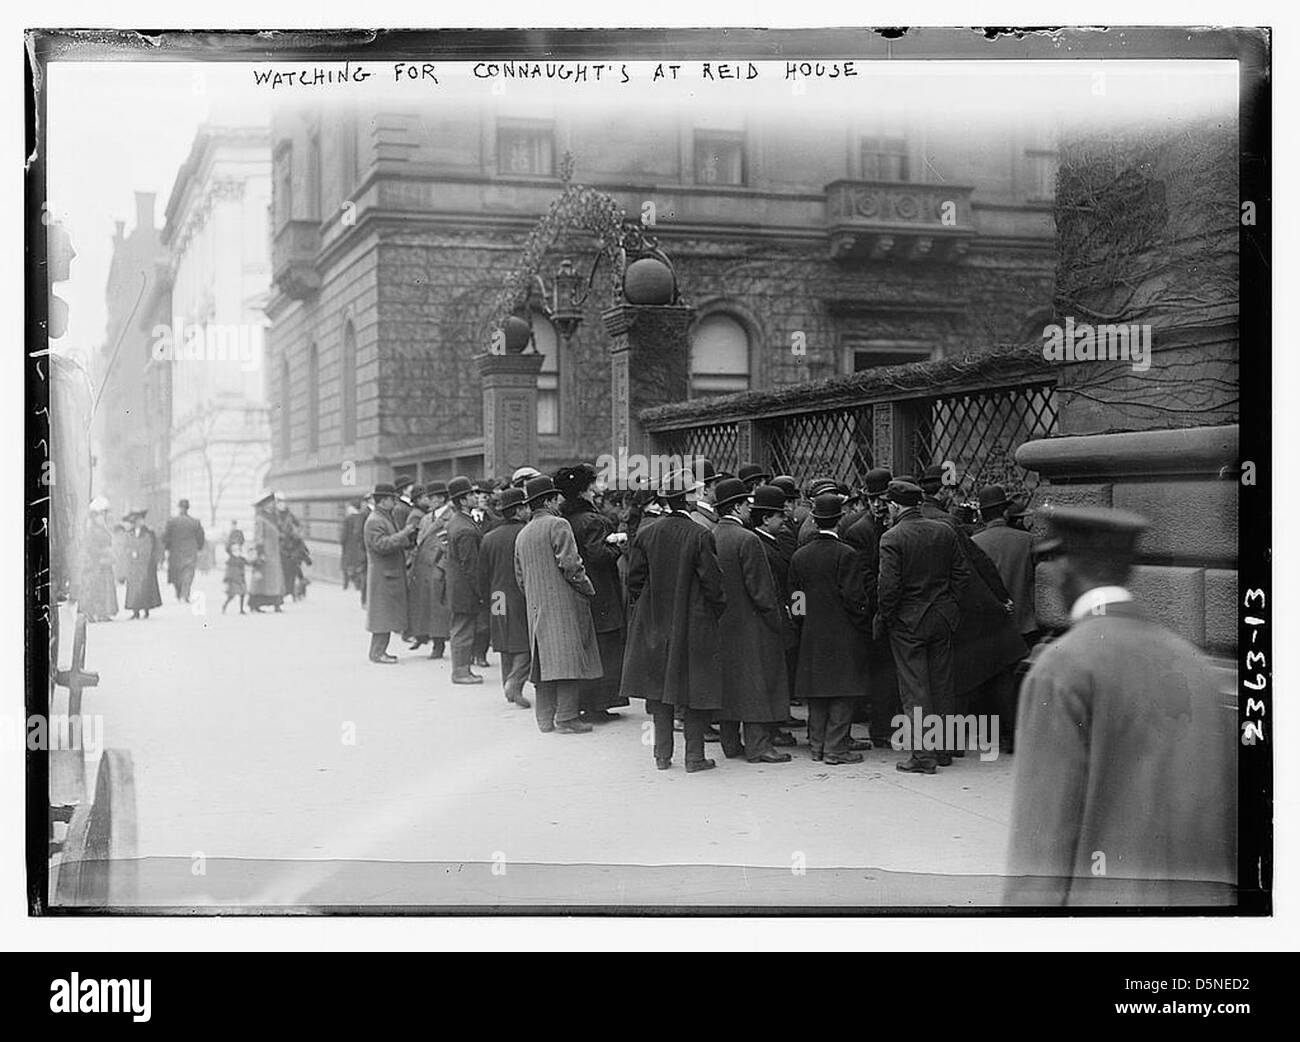 Watching for Connaught's at Reid house (LOC) Stock Photo